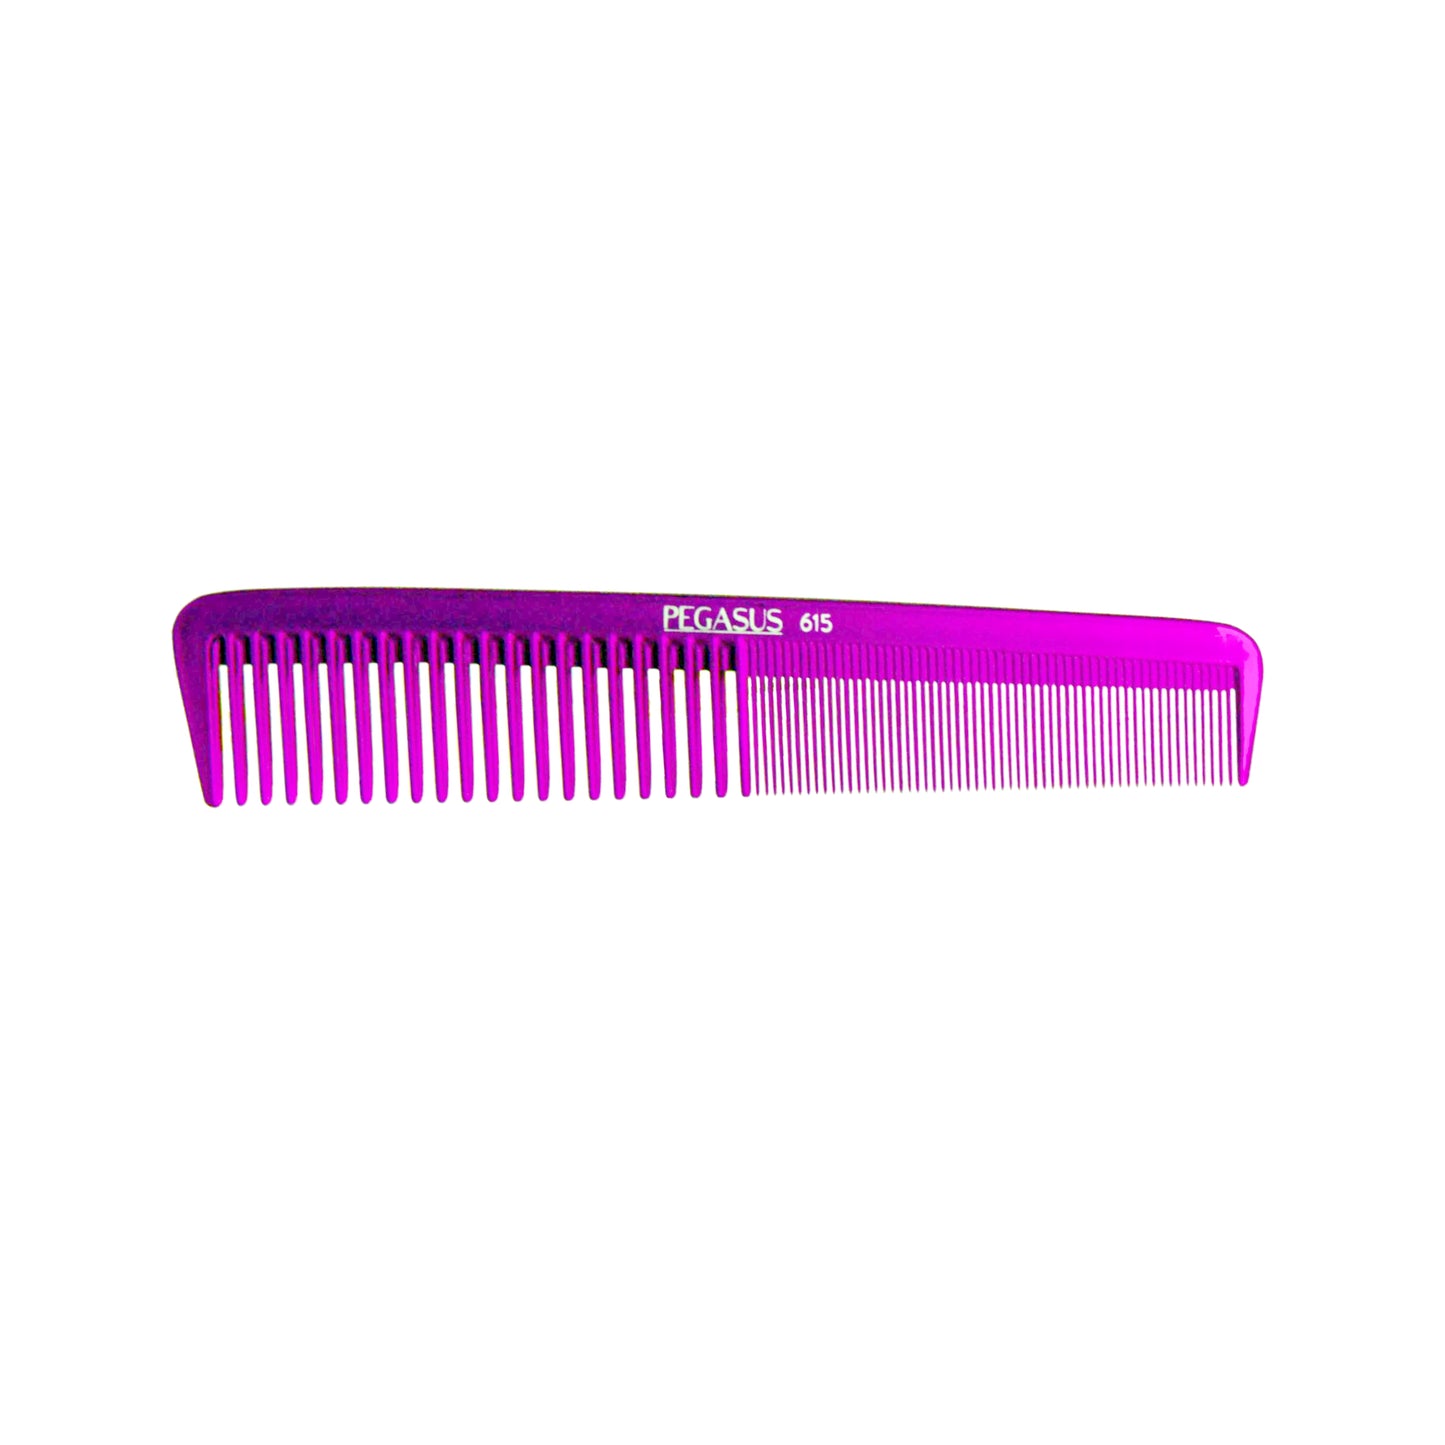 Pegasus MICOLOR 615, 7in Hard Rubber Clipper Comb, Handmade, Seamless, Smooth Edges, Anti Static, Heat and Chemically Resistant, Portable Pocket Purse Dresser Comb | Peines de goma dura - Pink